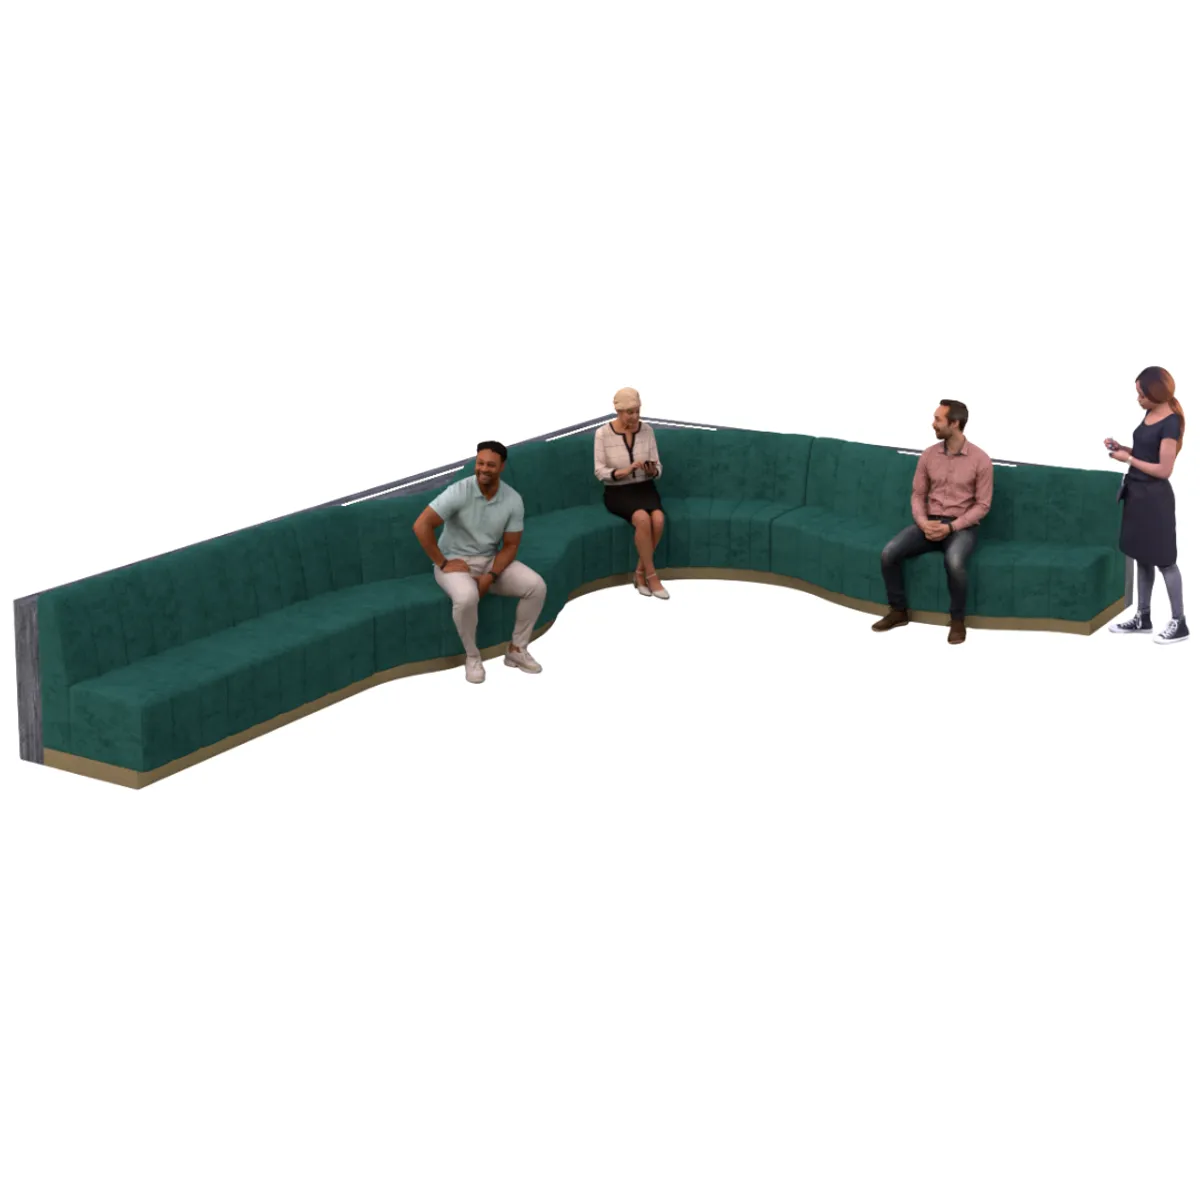 Snake Banquette Seating 5